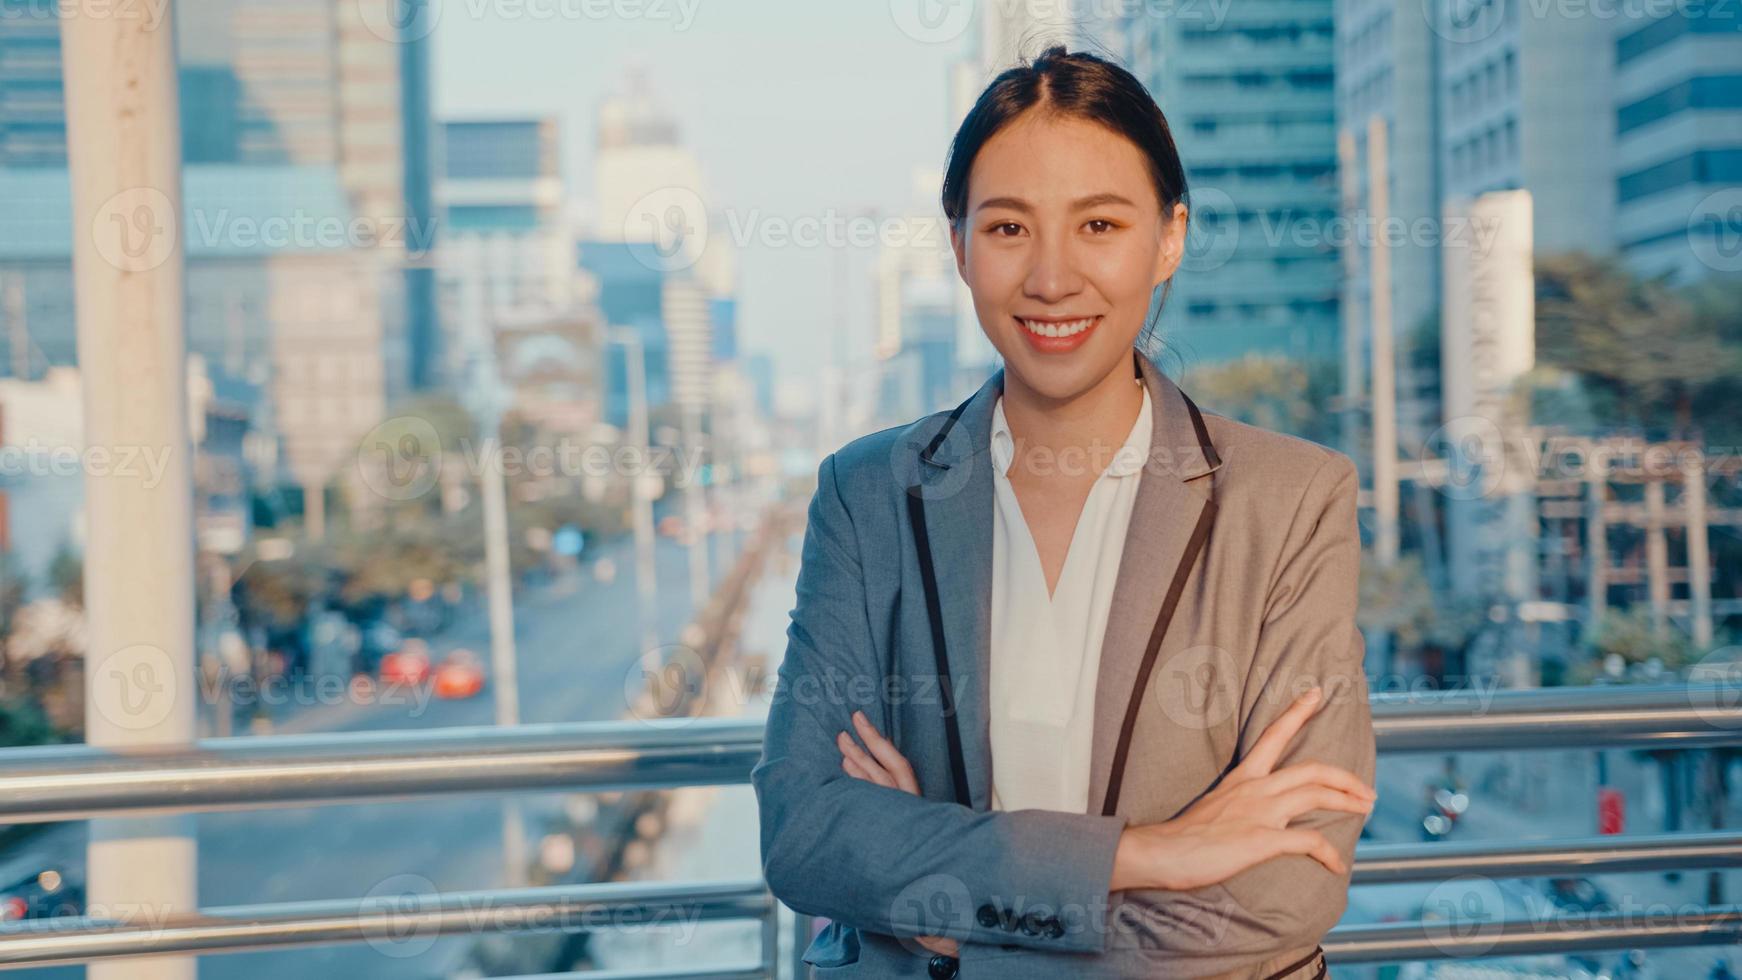 Successful young Asia businesswoman in fashion office clothes smiling and looking at camera while happy standing alone outdoors in urban modern city in the morning. Business on the go concept. photo